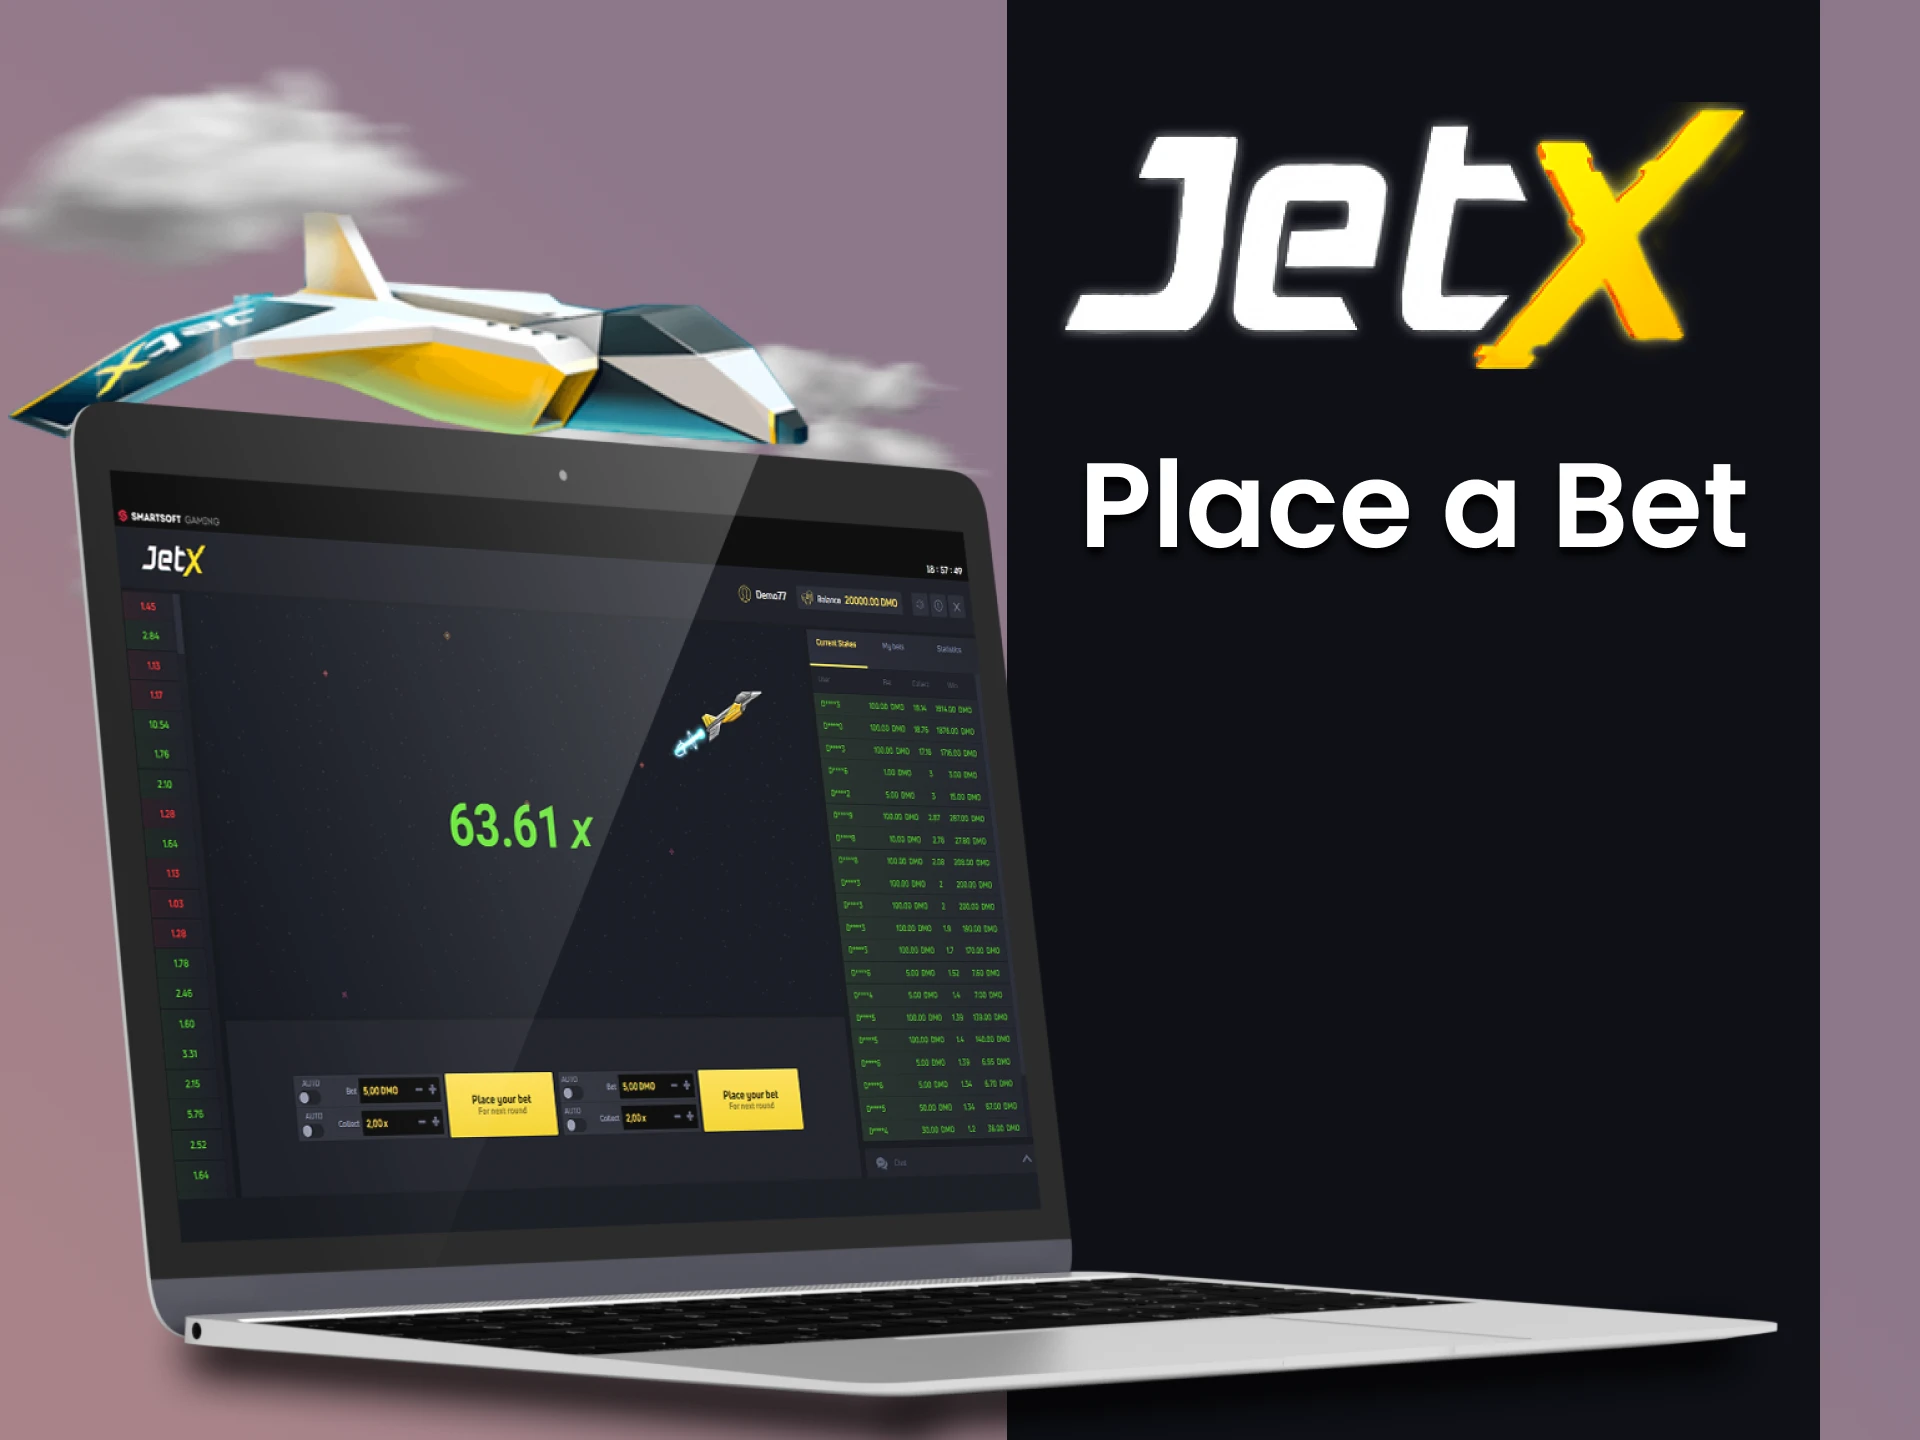 Start placing bets in the demo version of the JetX game.